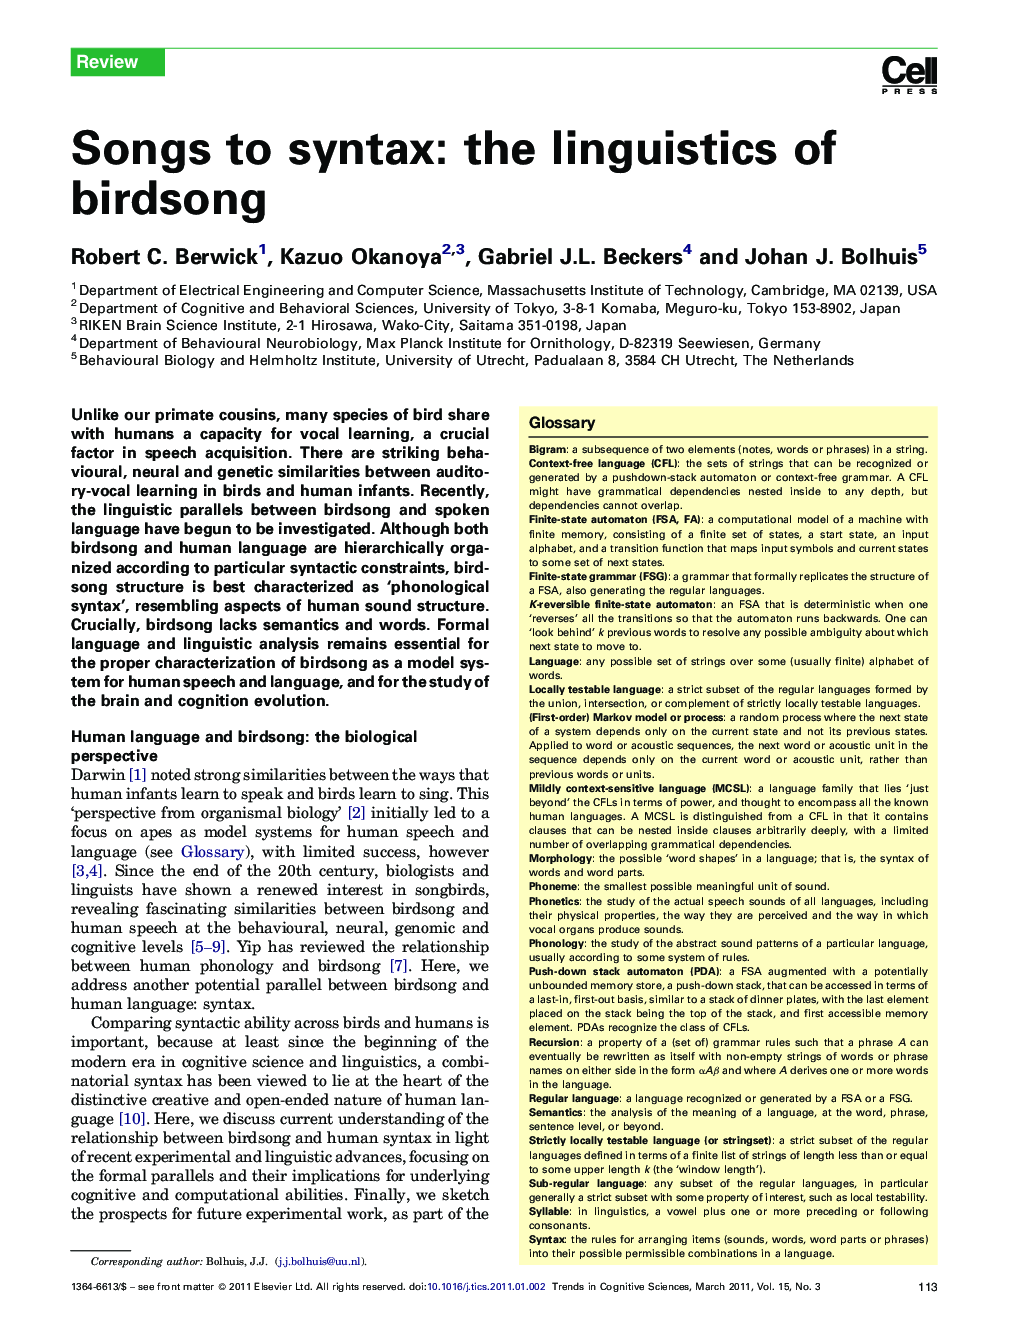 Songs to syntax: the linguistics of birdsong